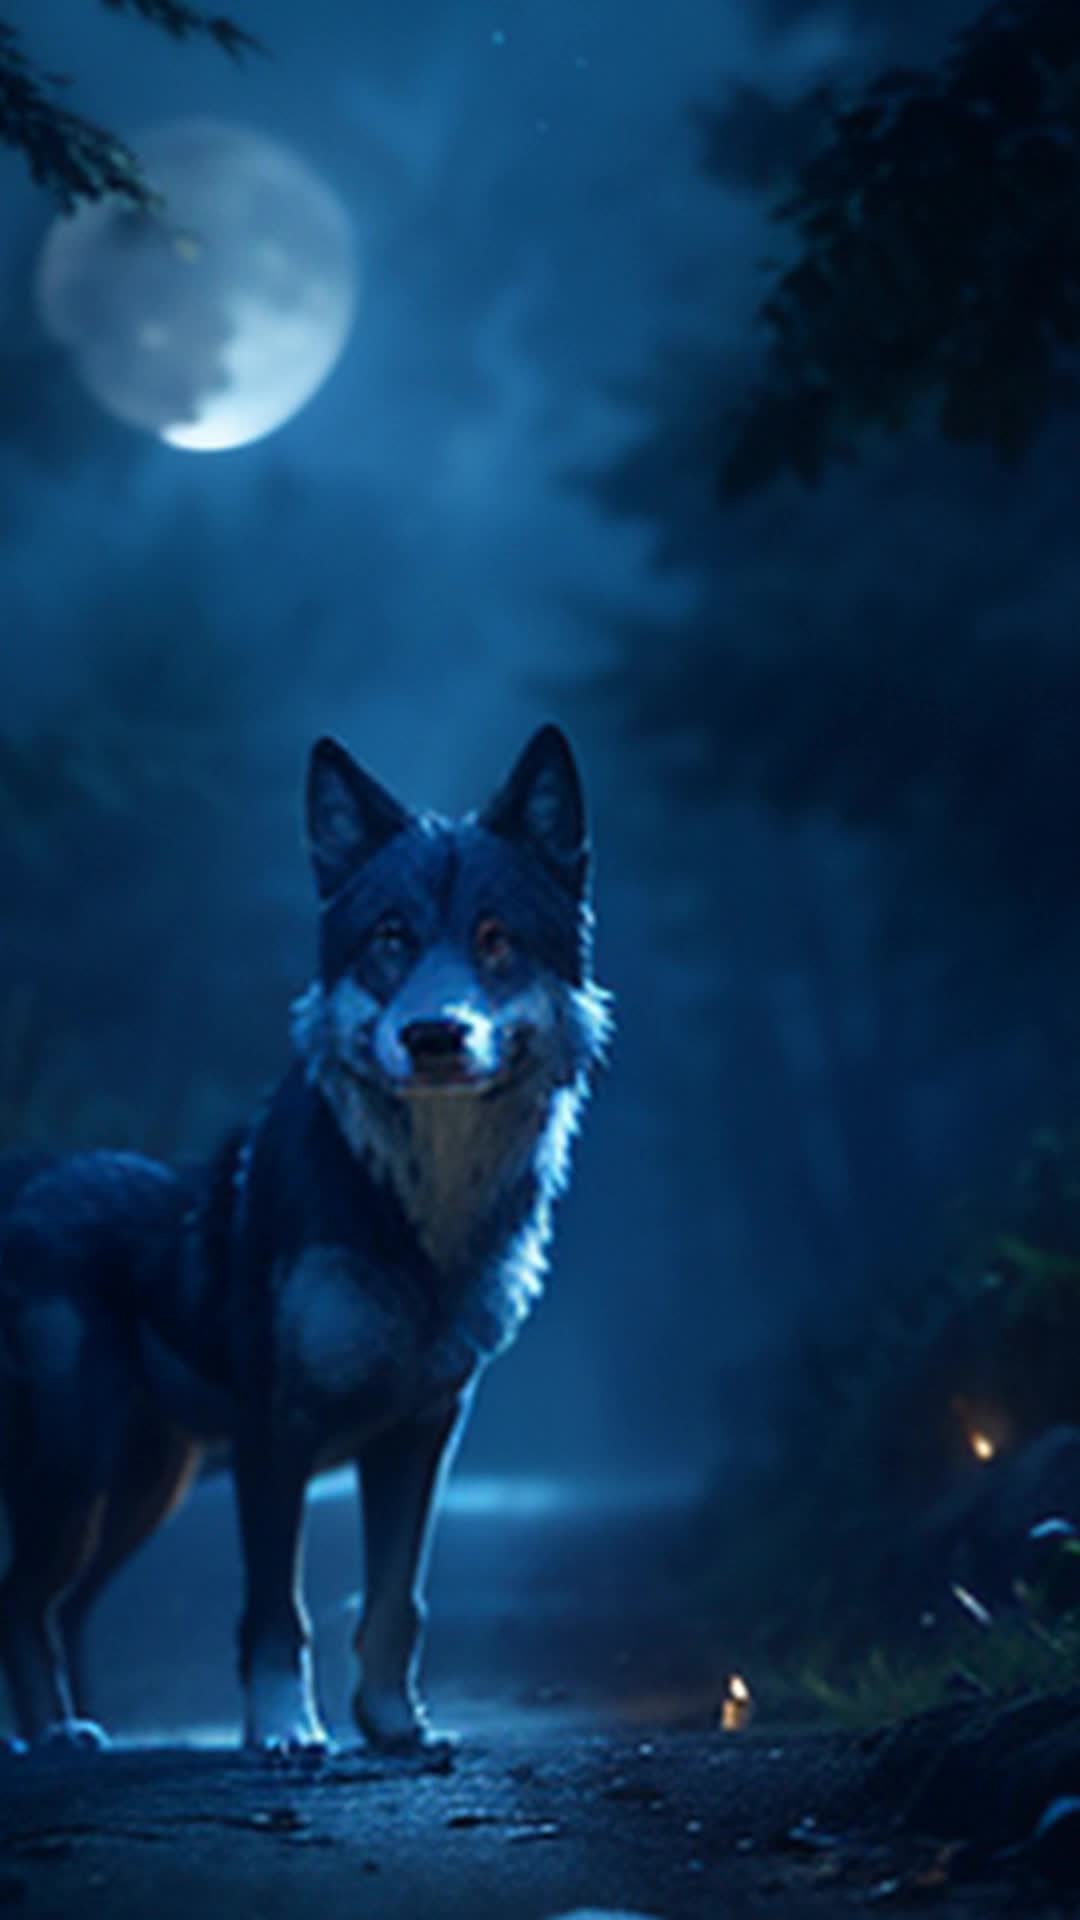 Mystical wolf luminous presence, glowing under moonlight, effortlessly navigating, spectral woodlands, beacon guiding to spirit world gateway, ethereal atmosphere